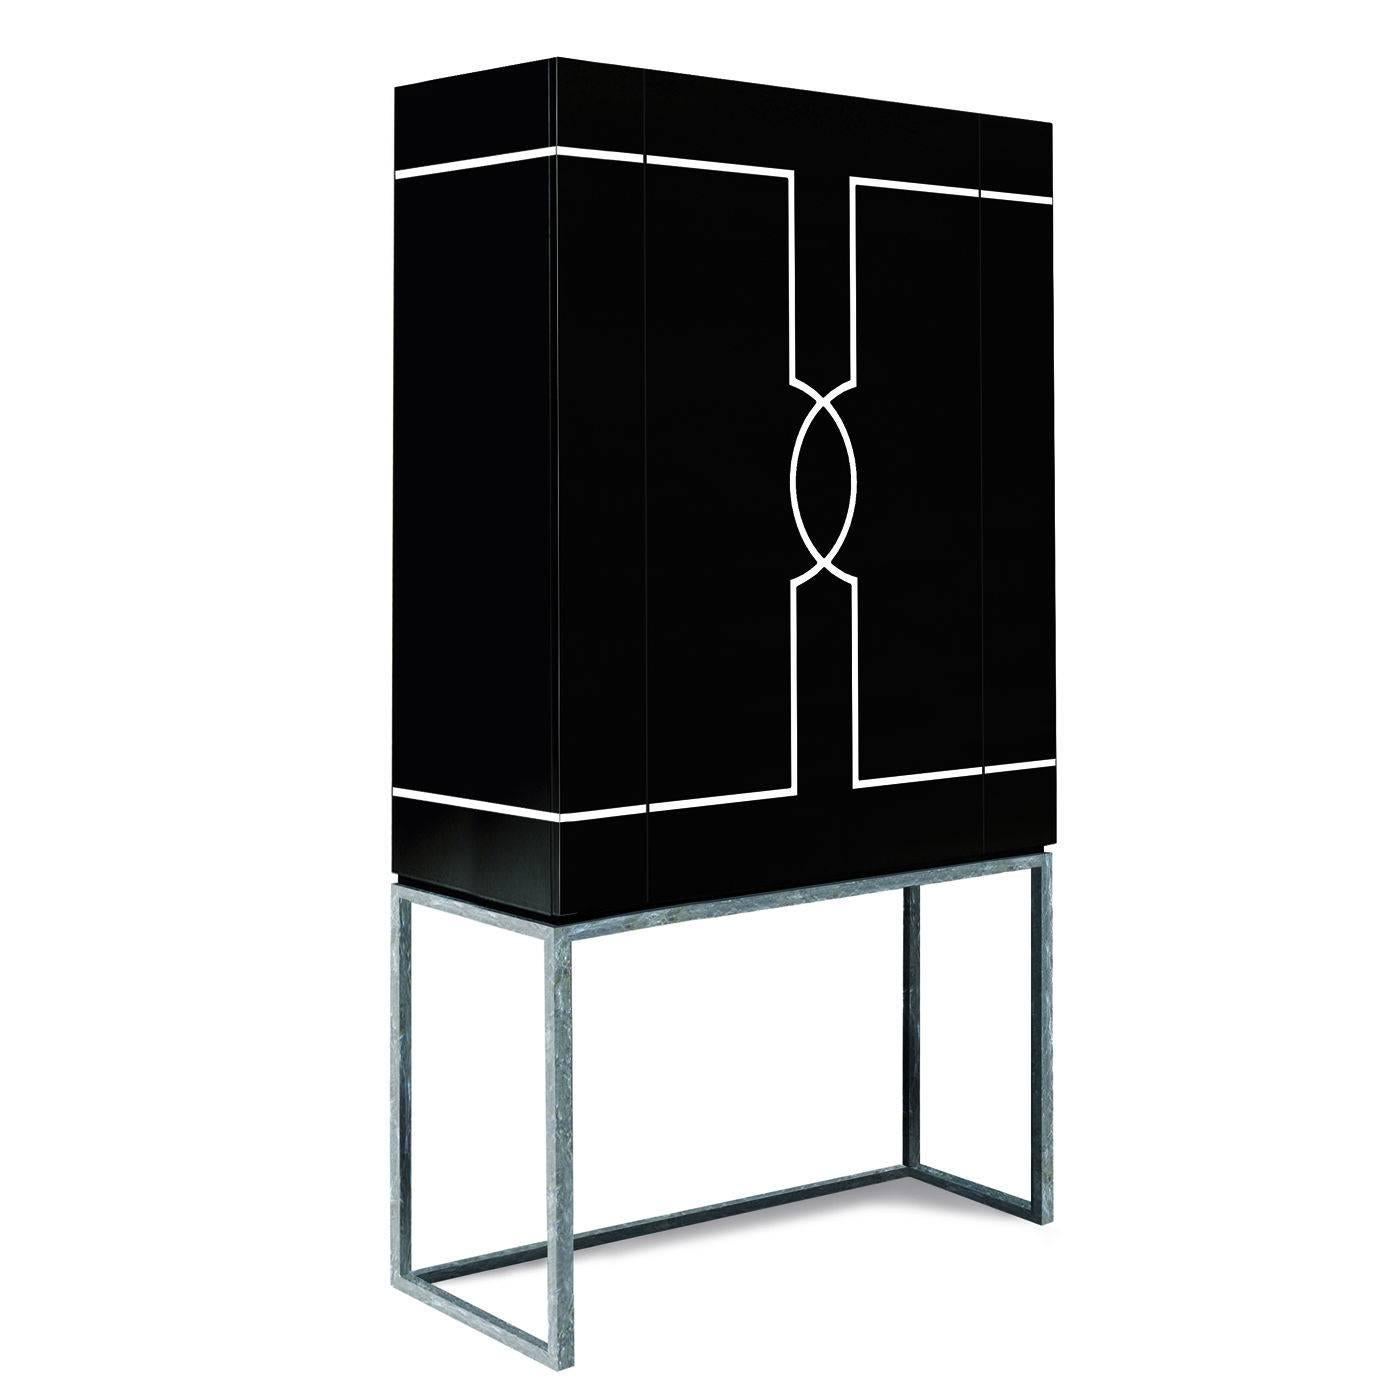 This one-door drink cabinet beautifully crafted by the finest Italian artisans rests on a silver leaf metal frame and features a push-to-open mechanism on the central door. The addition of a geometric motif on the front and sides offers a subtly